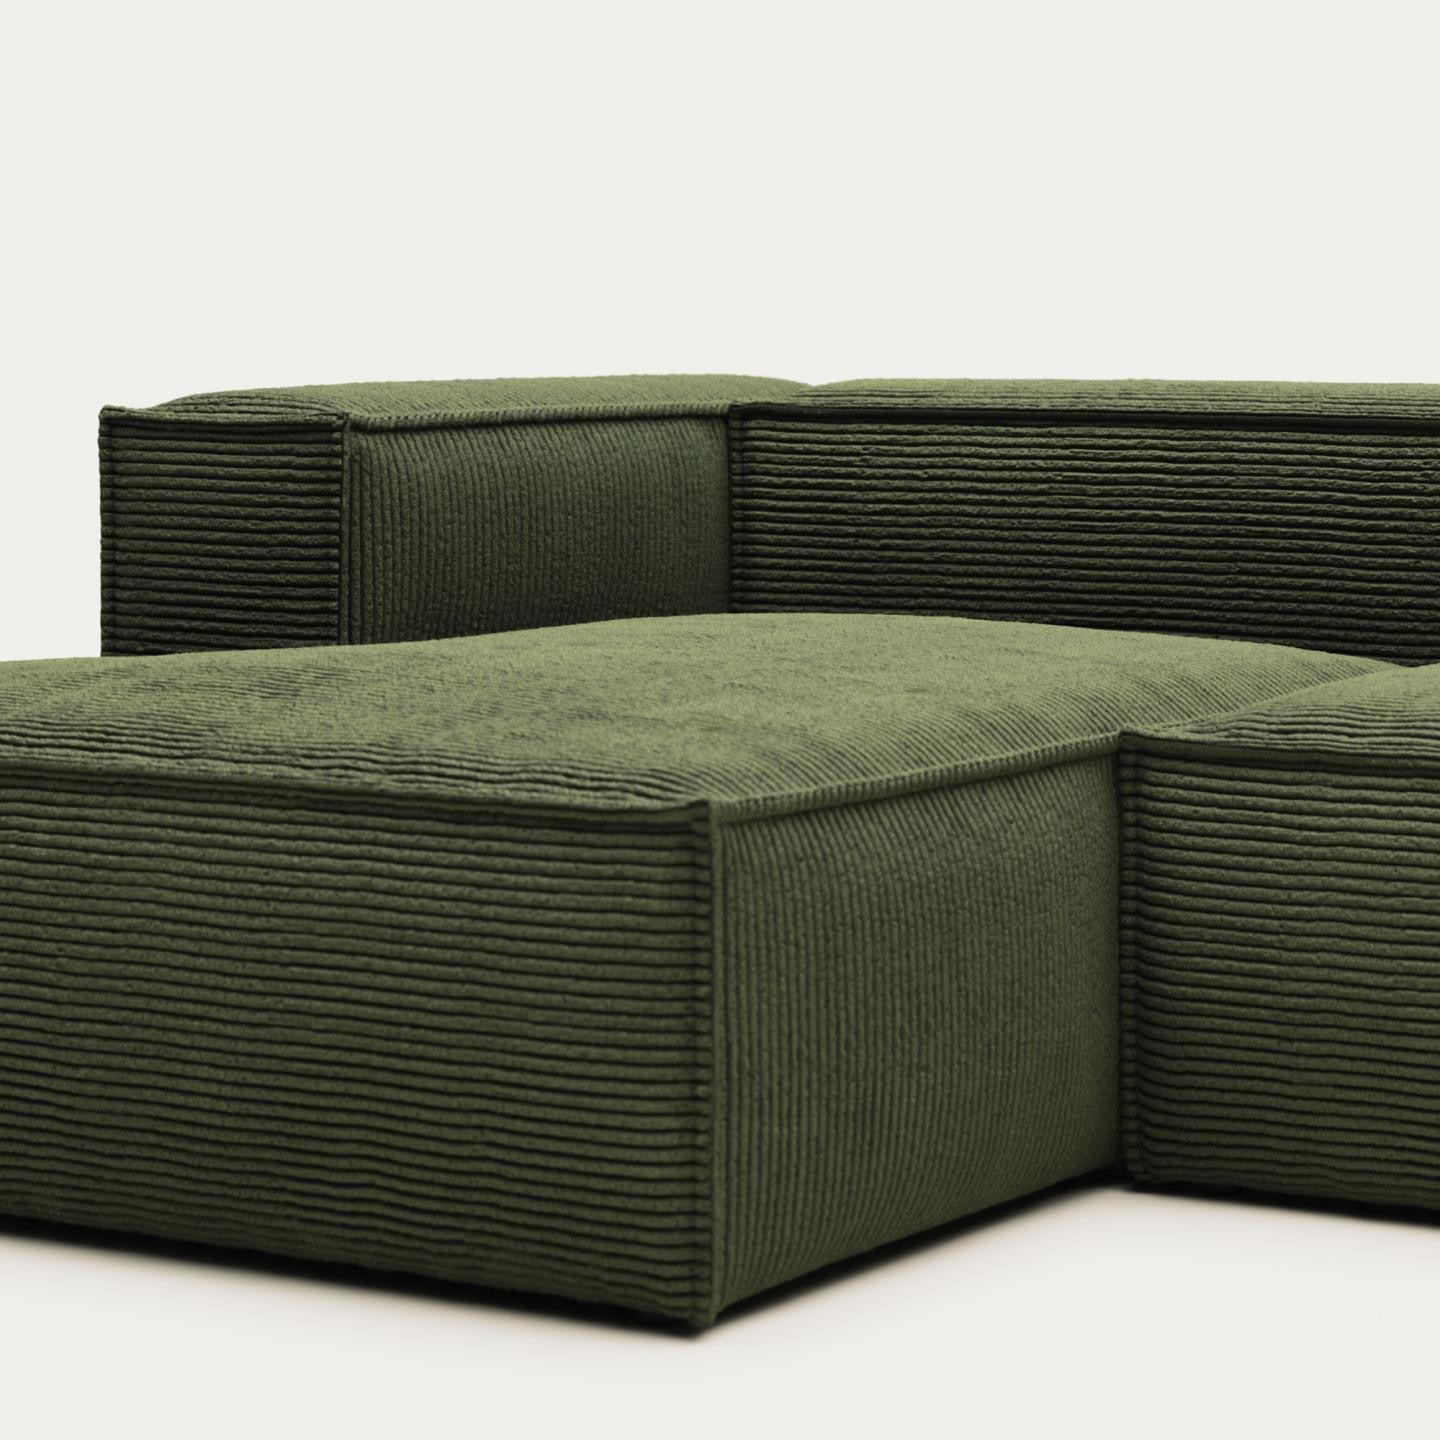 Lund 2 Seater Sofa with Left Side Chaise - Green Corduroy